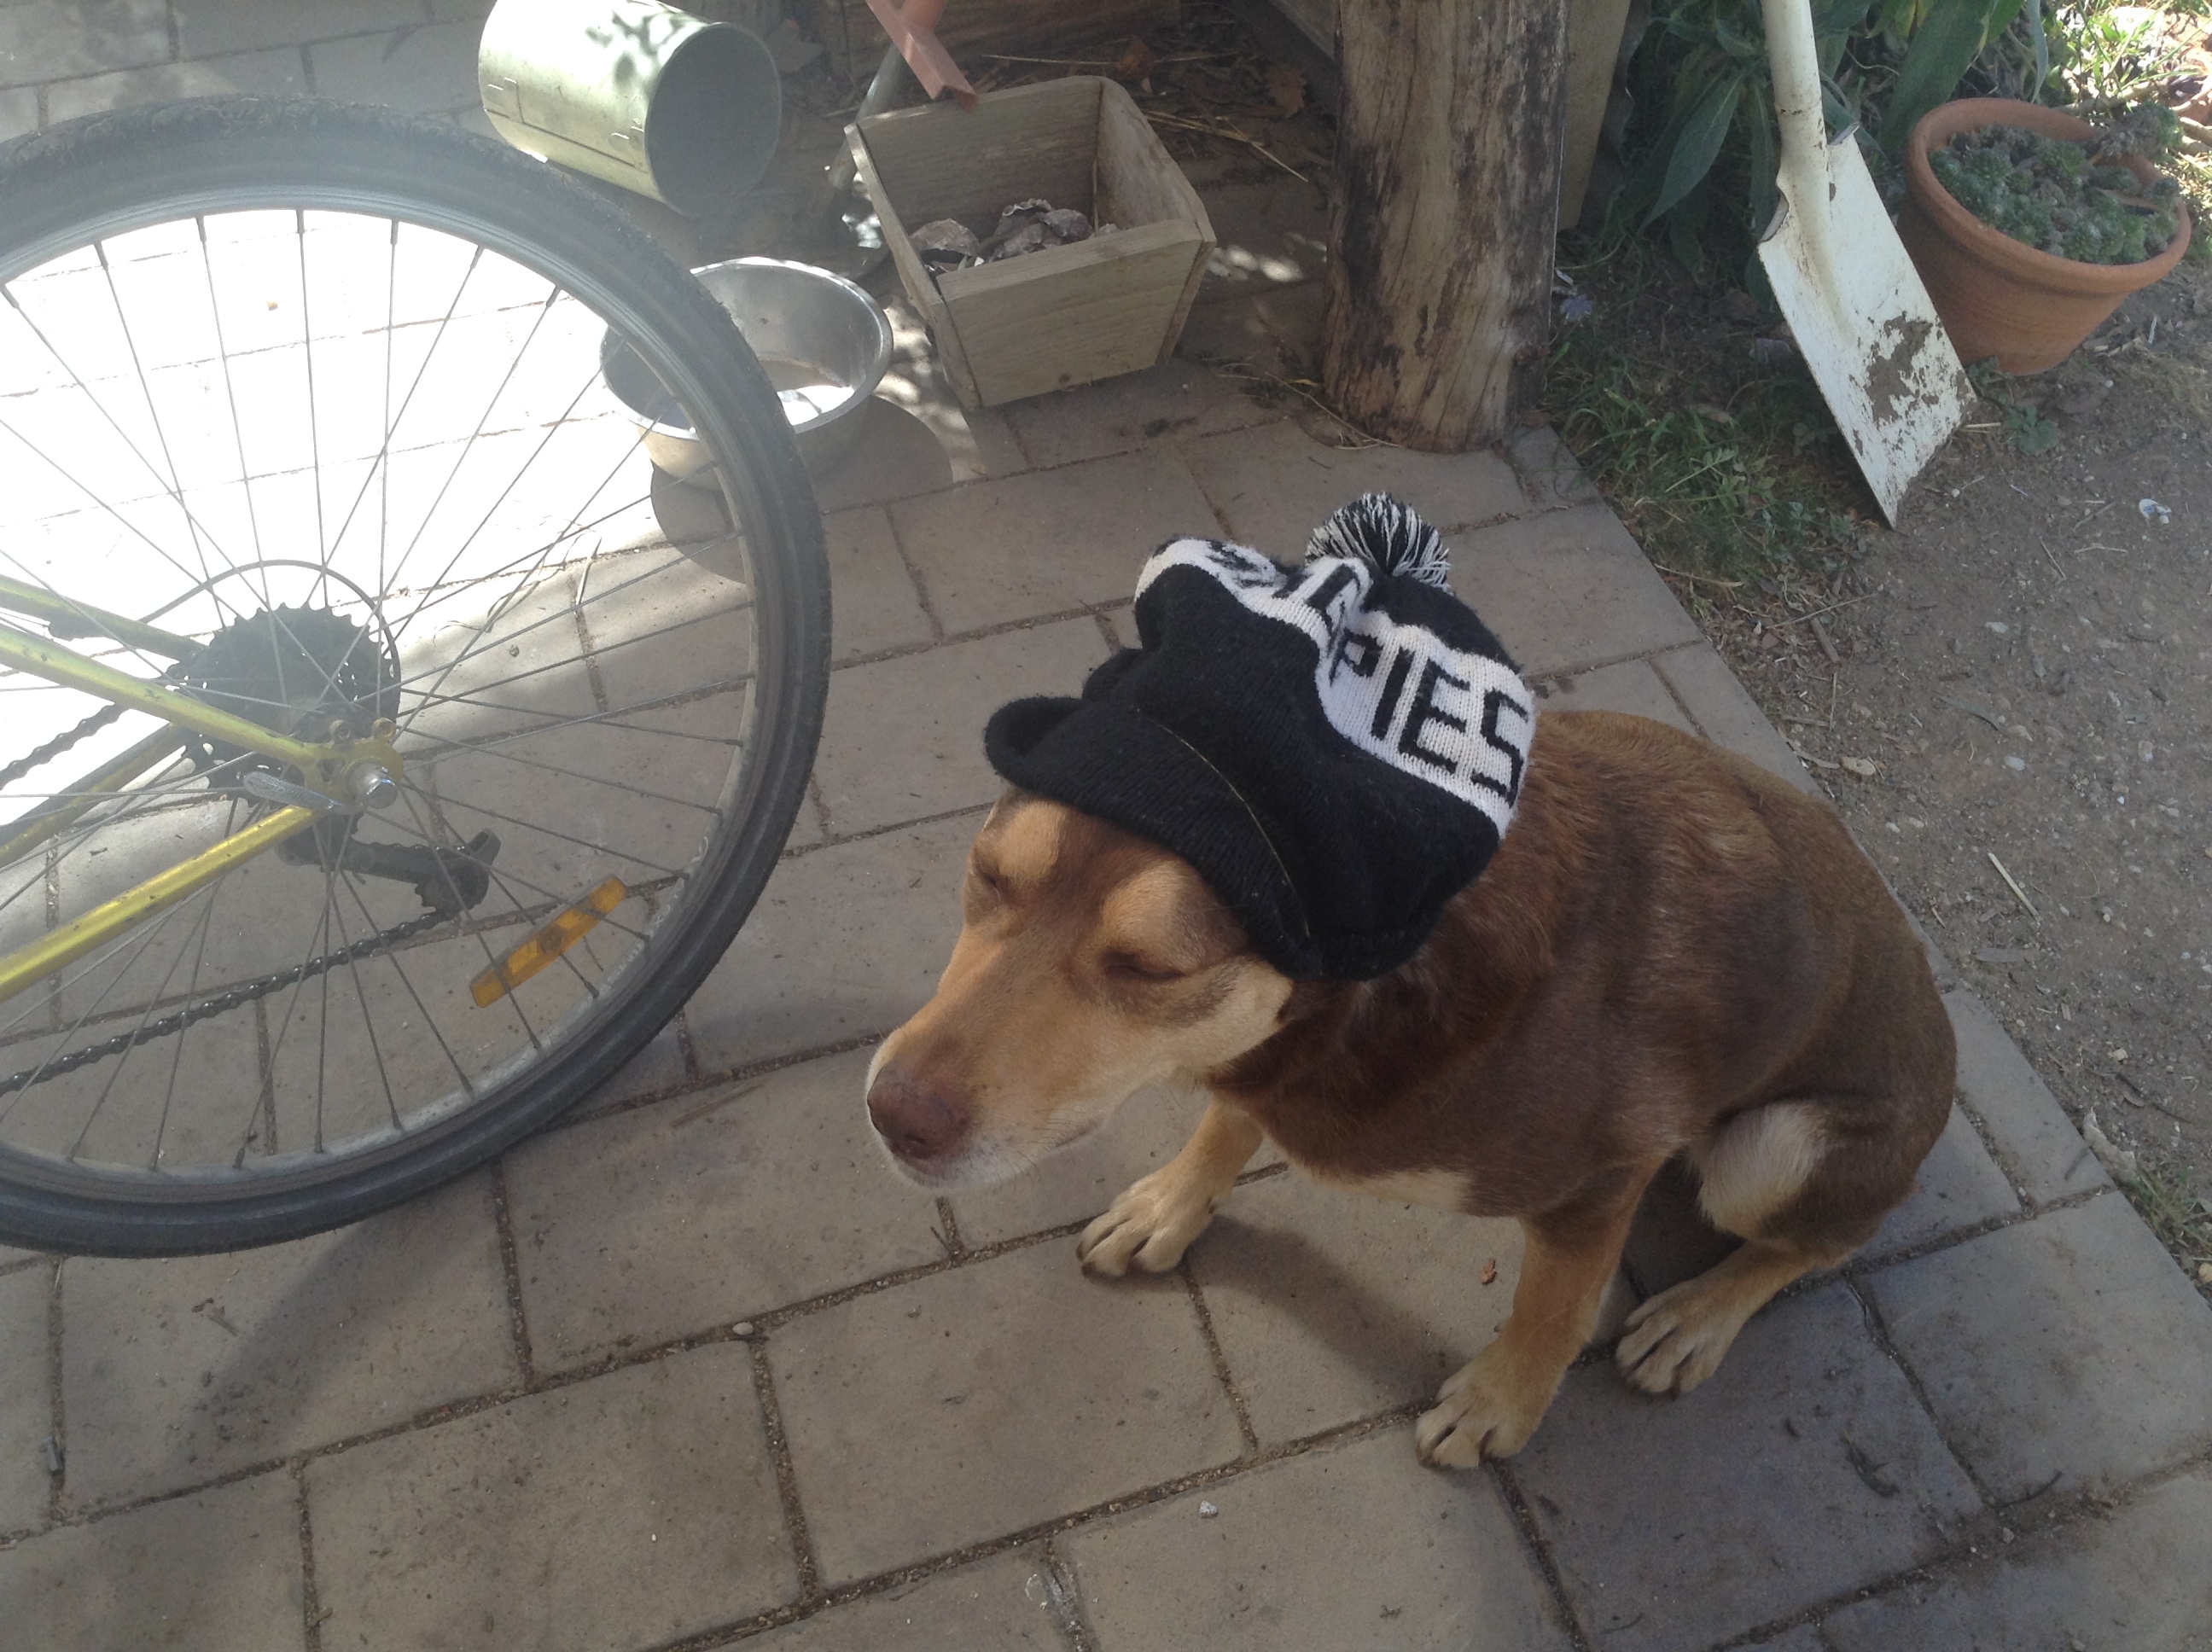 My dogs a great Collingwood supporter!